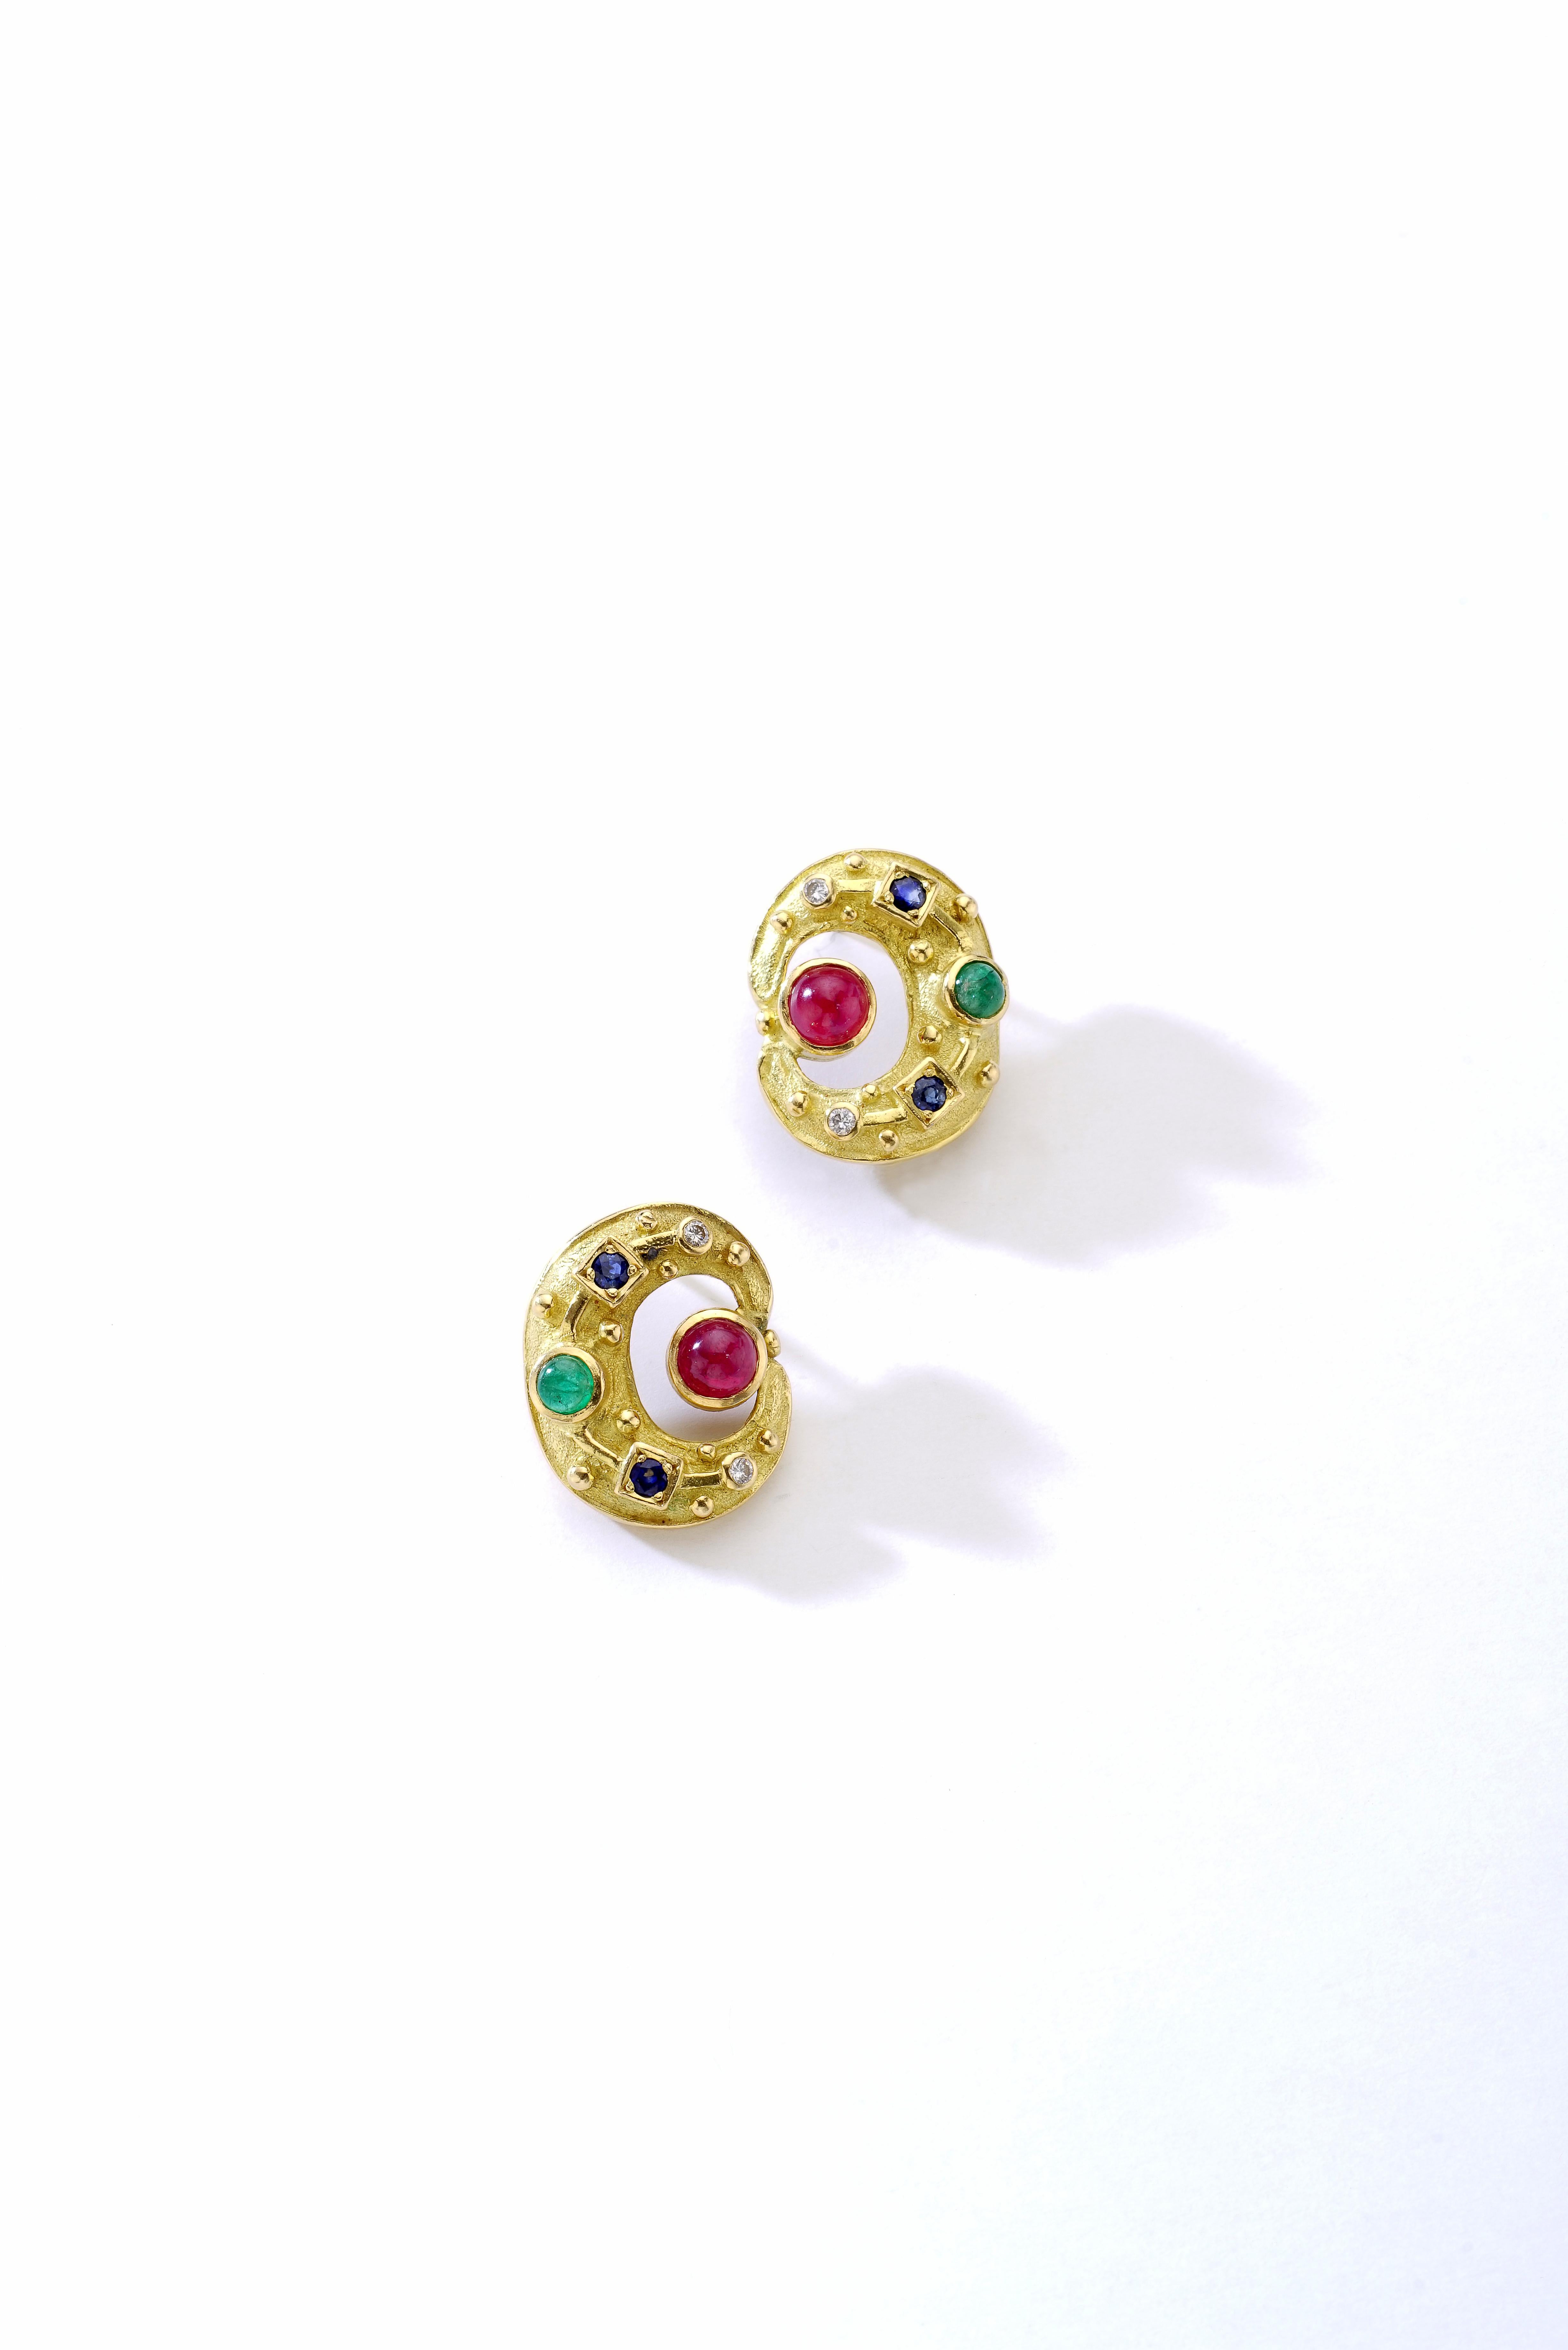 Lalaounis Ruby Emerald Sapphire yellow gold Earrings. 
Greek work. Circa 1980.

Total height: 0.79 inch (2.00 centimeters).
Total width: 0.59 inch (1.50 centimeters).

Former property of a French Lady.
